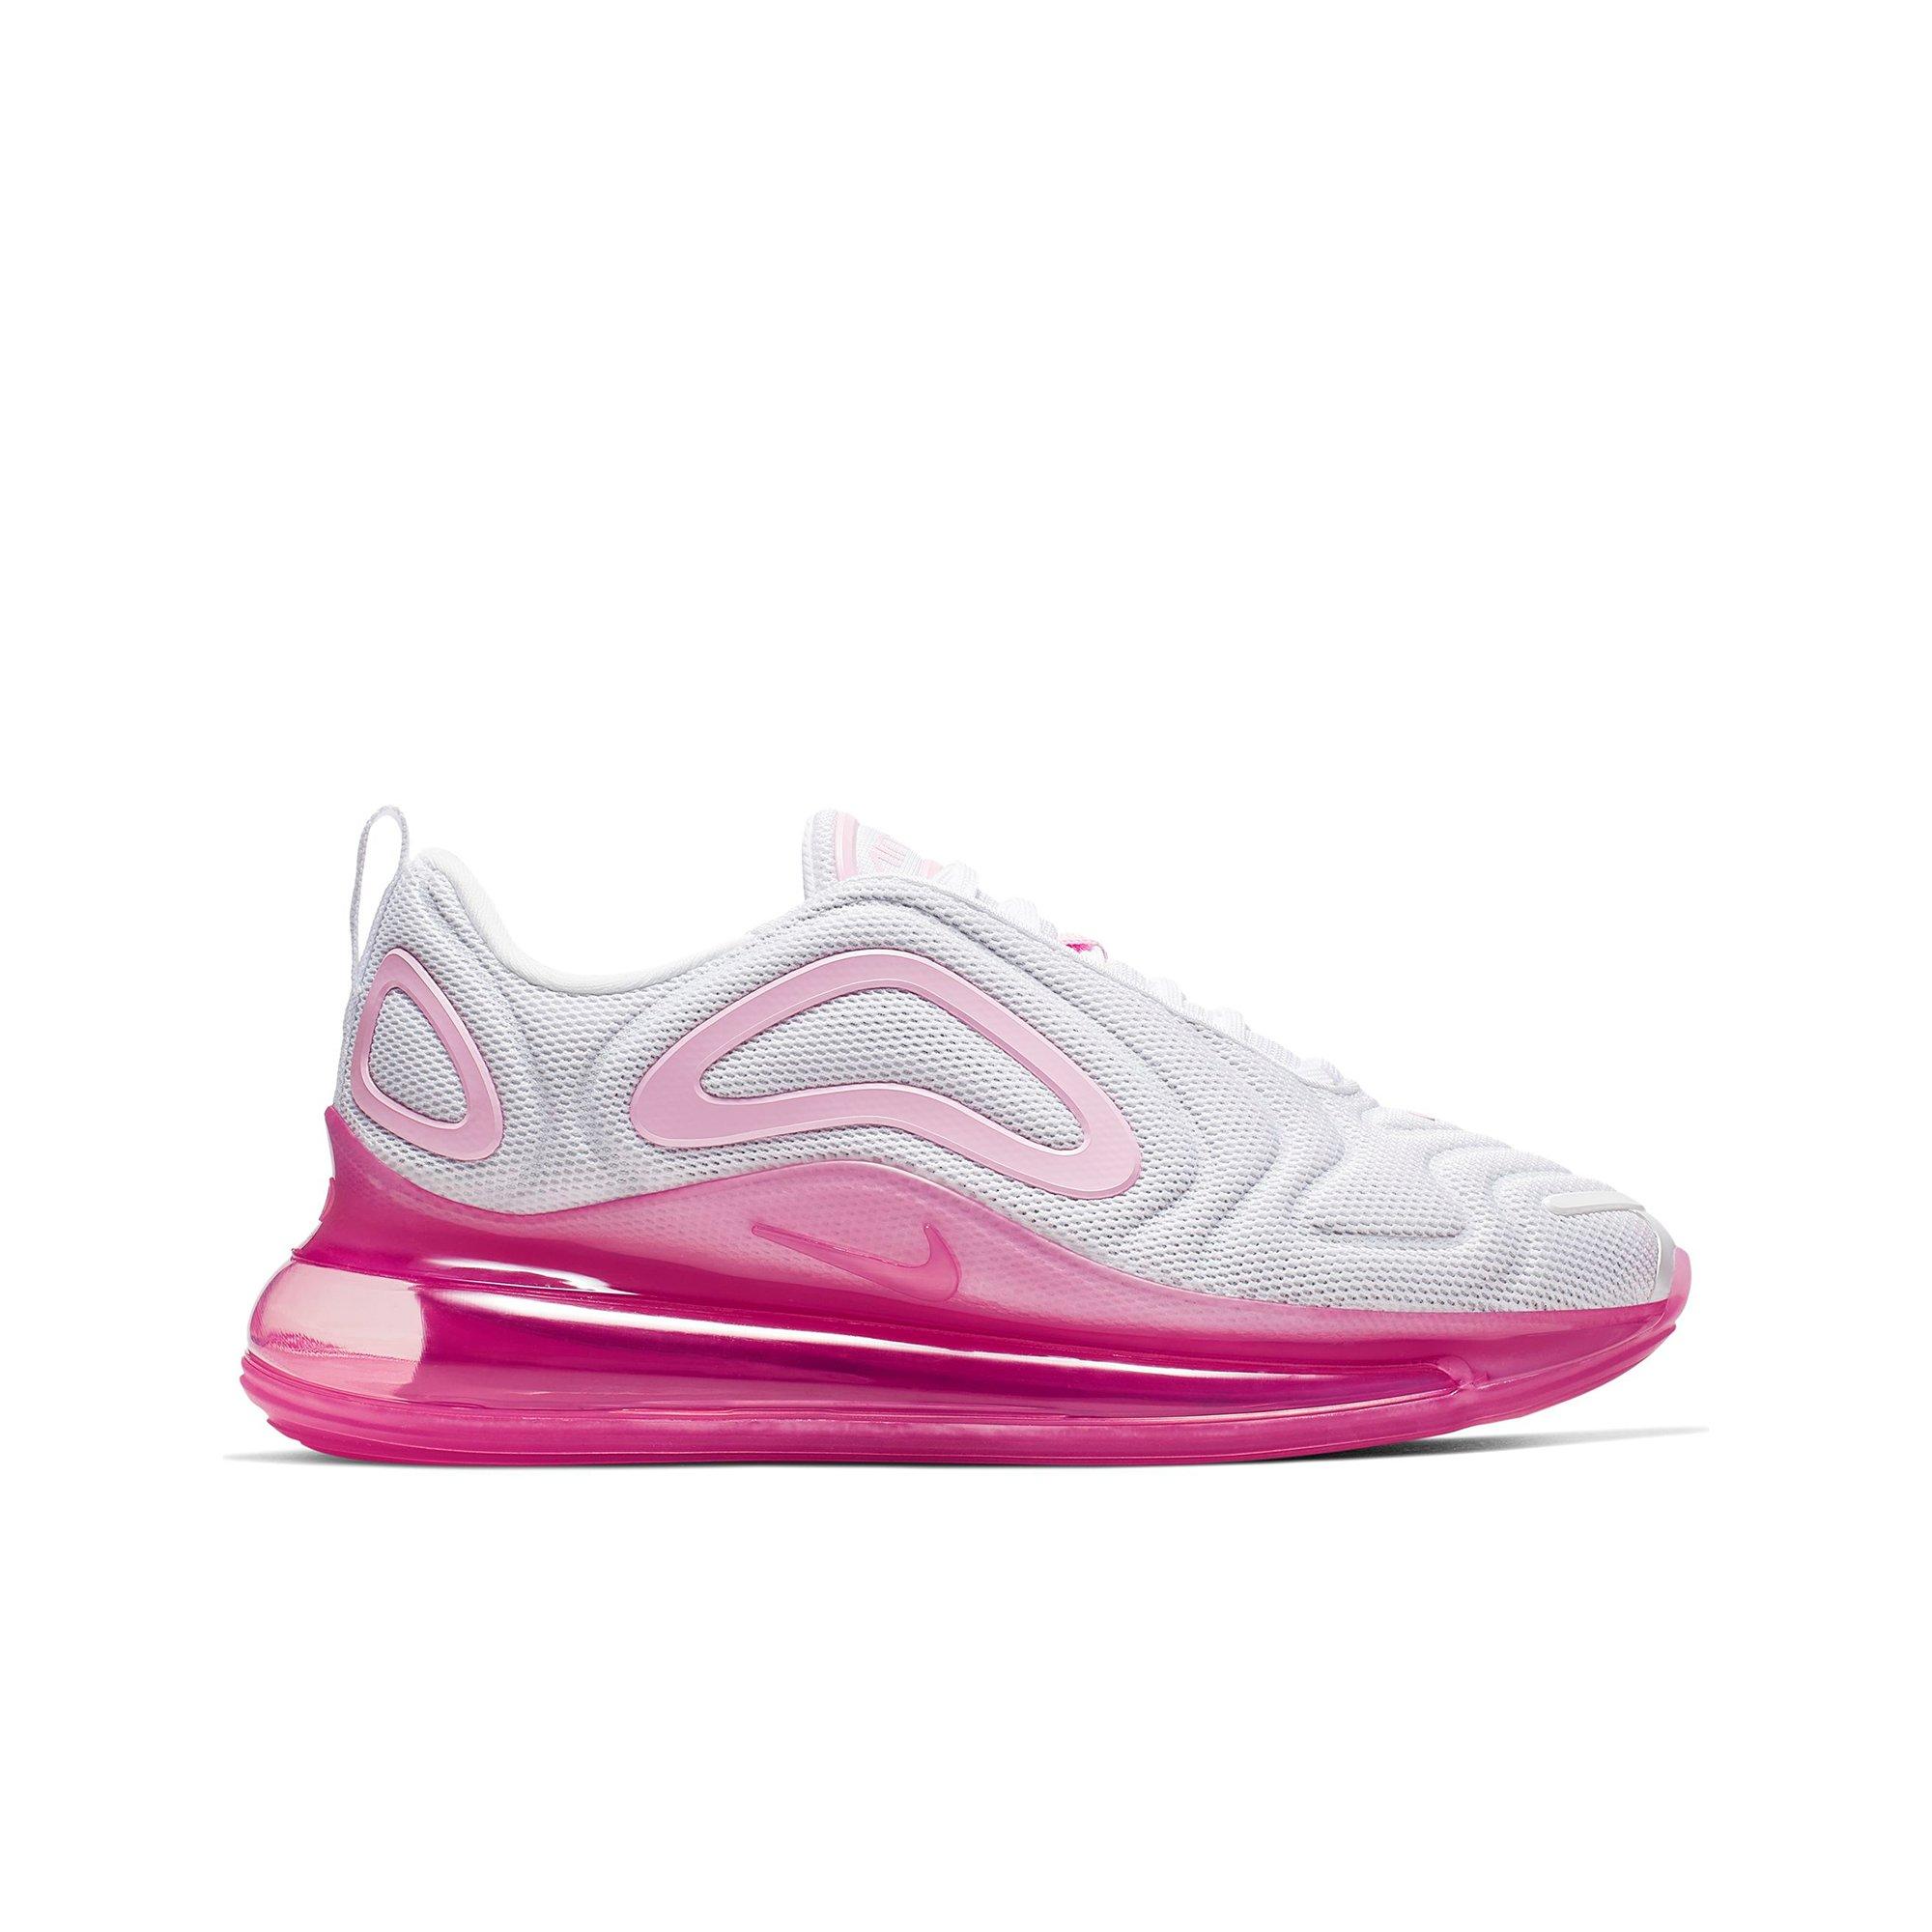 pink and white 720 air max